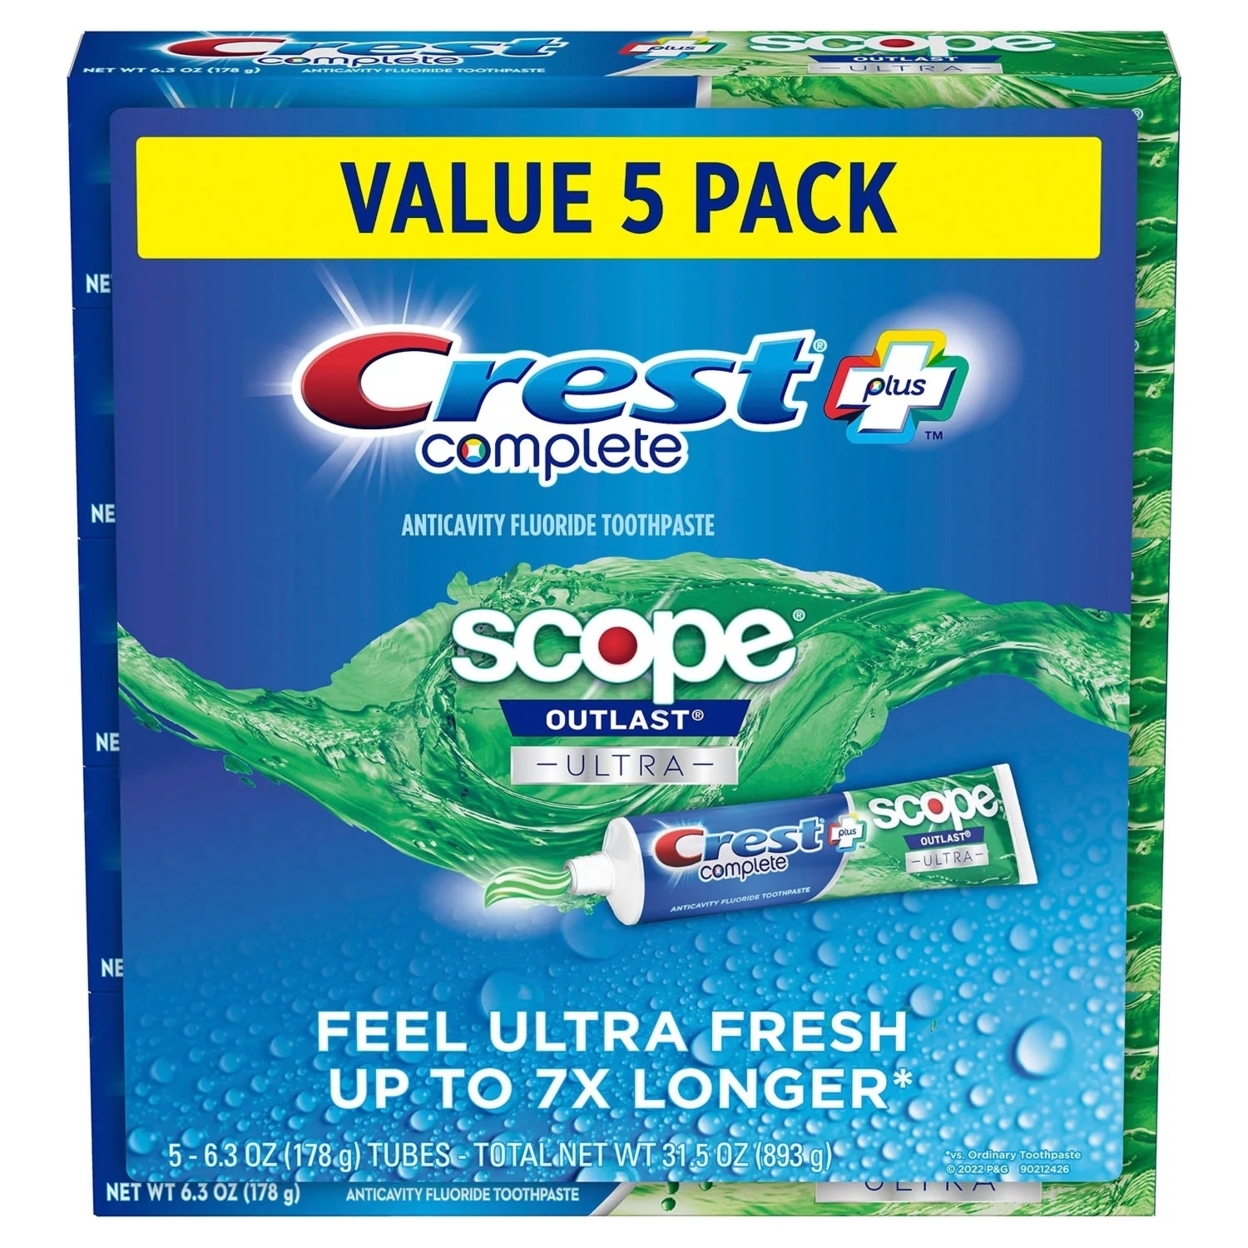 Crest Complete + Scope Outlast Ultra Toothpaste, 6.3 Ounce (Pack Of 5)